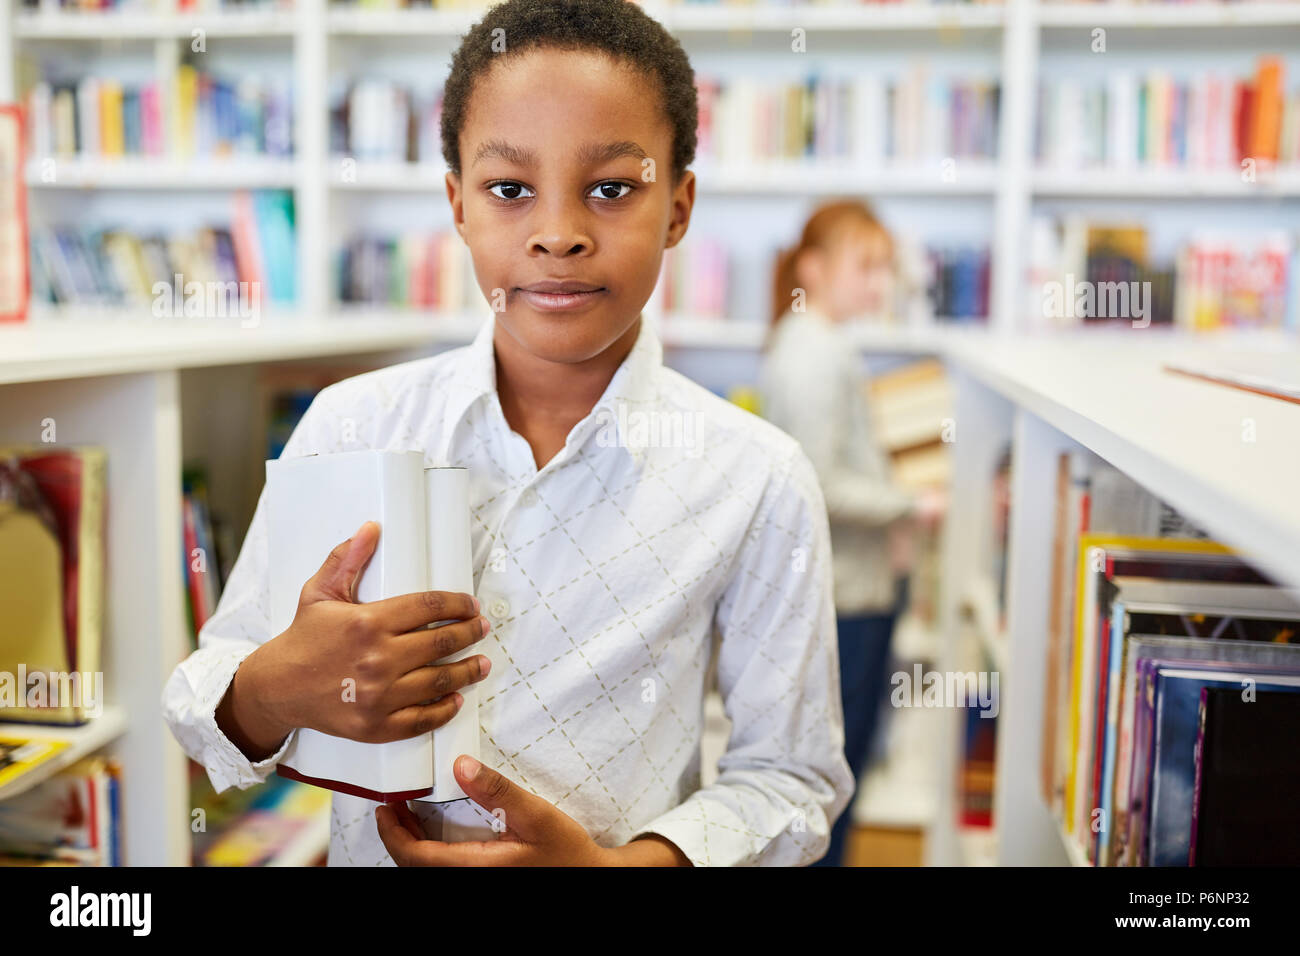 African student borrowing books from the school library Stock Photo